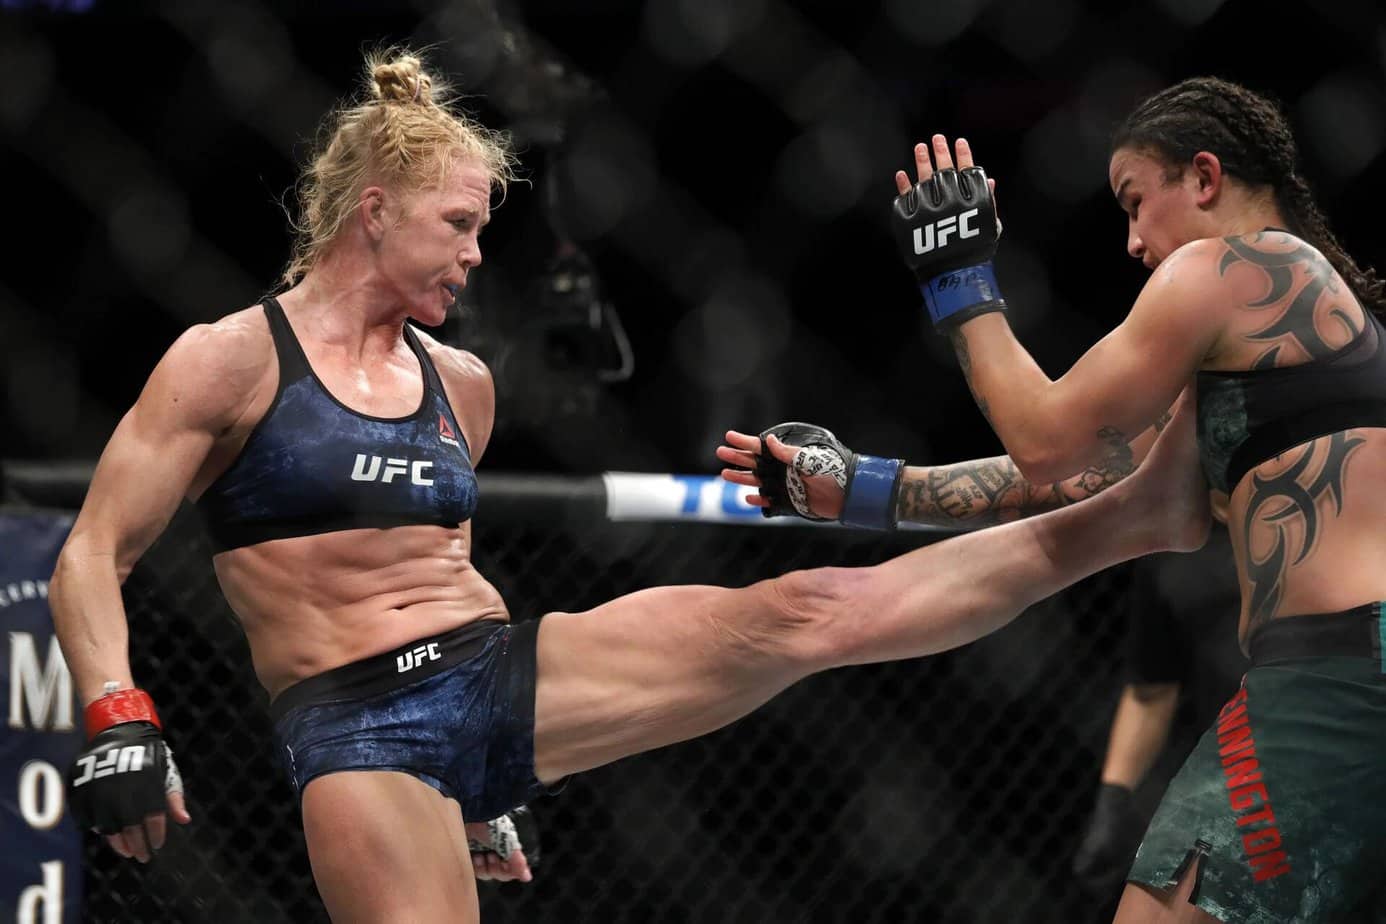 UFC Fight Night: Holm vs. Vieira – Preview and Betting Odds